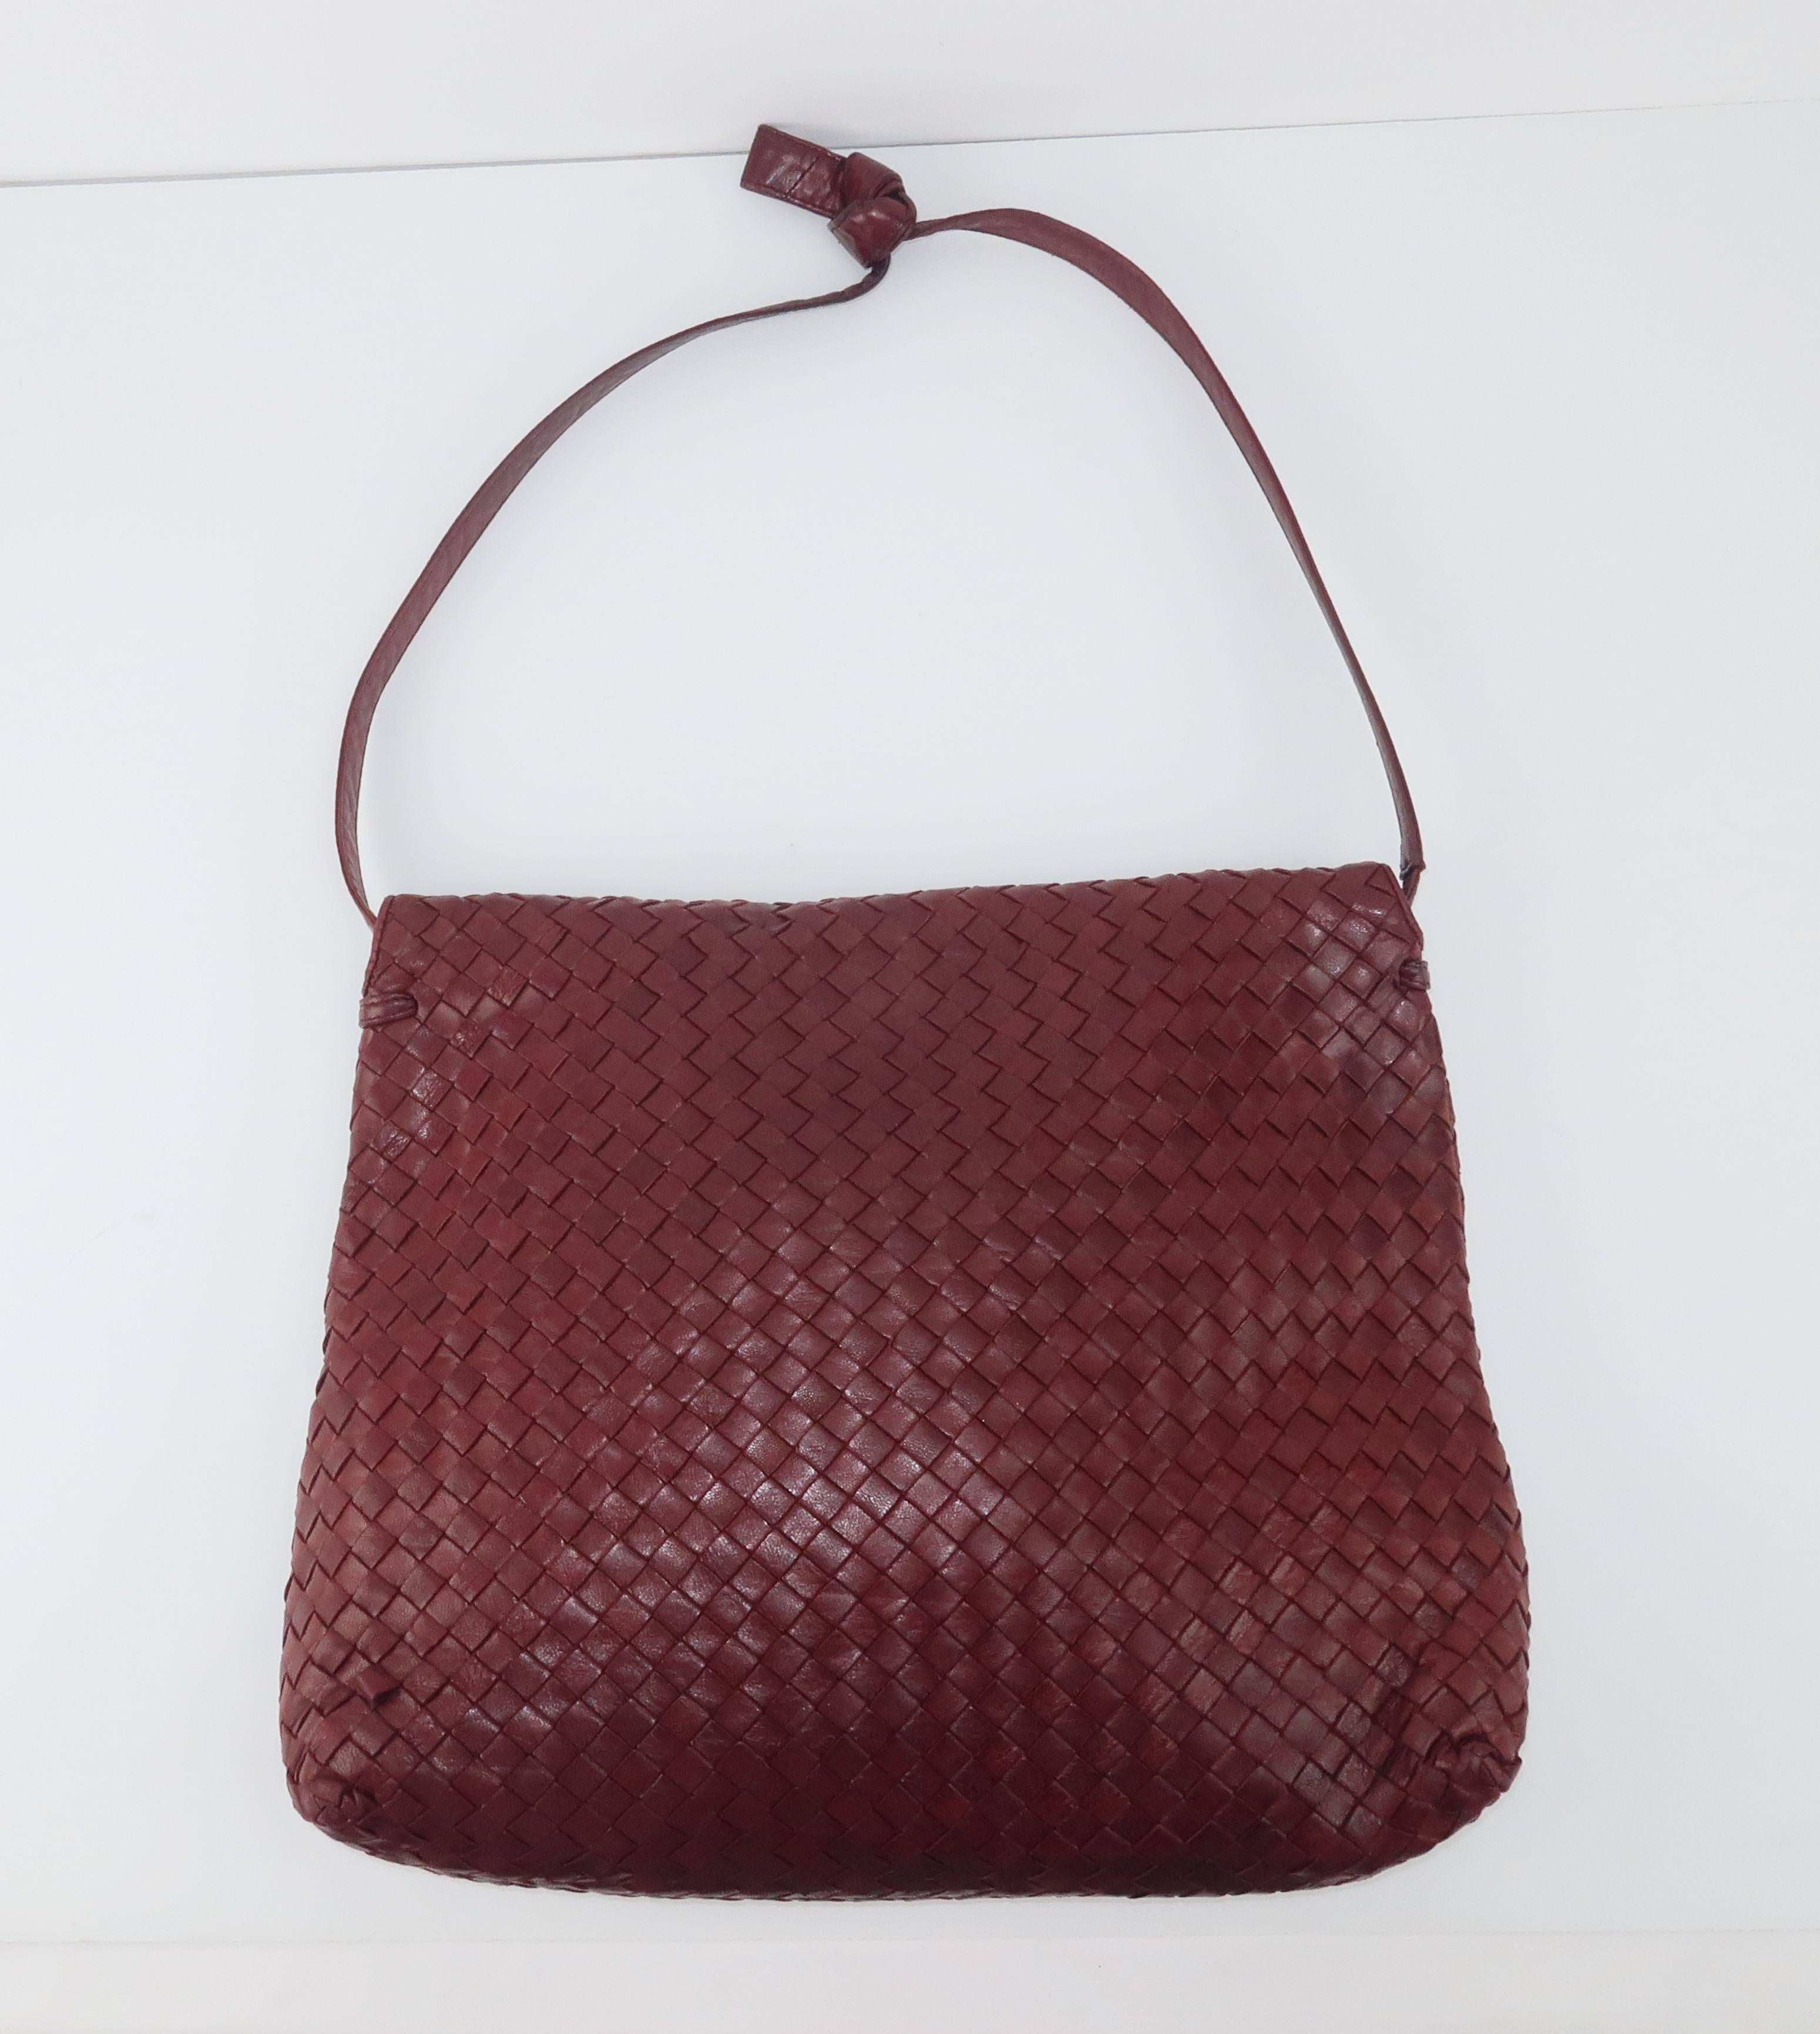 'When your own initials are enough' ... such is the philosophy of the Italian fashion house, Bottega Veneta.  Bottega's unique 'intrecciato' woven leather design speaks volumes about style and quality without the necessity of a logo.  This beautiful